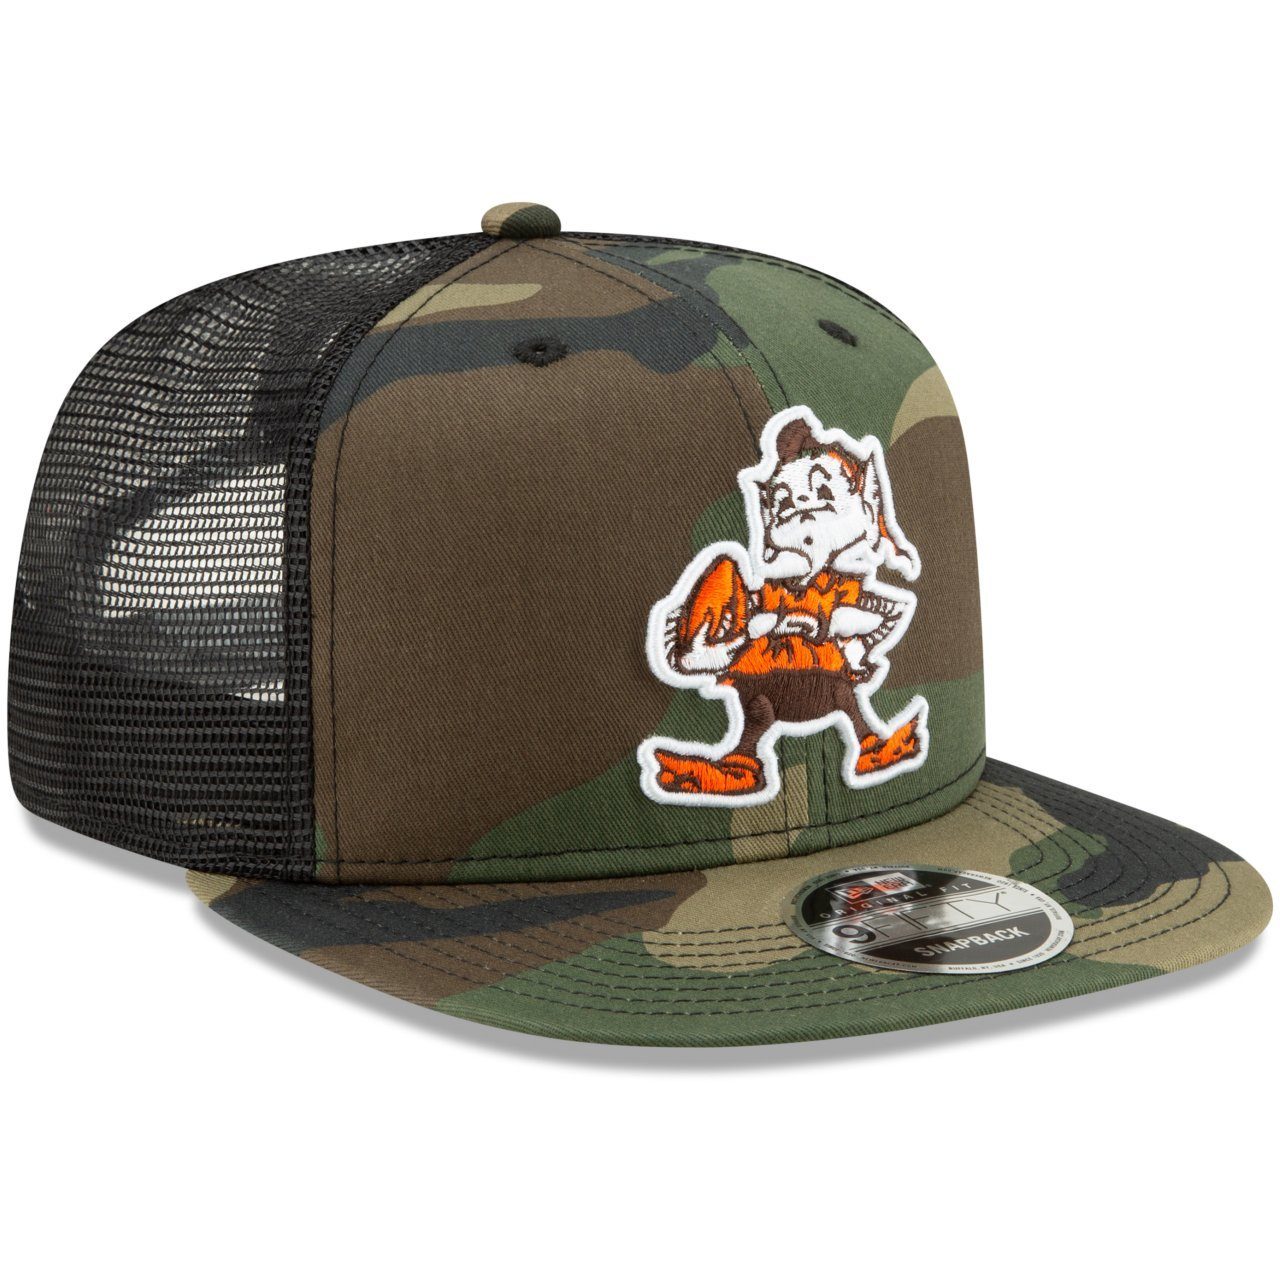 9Fifty Era Cleveland Cap New Browns Snapback Throwback